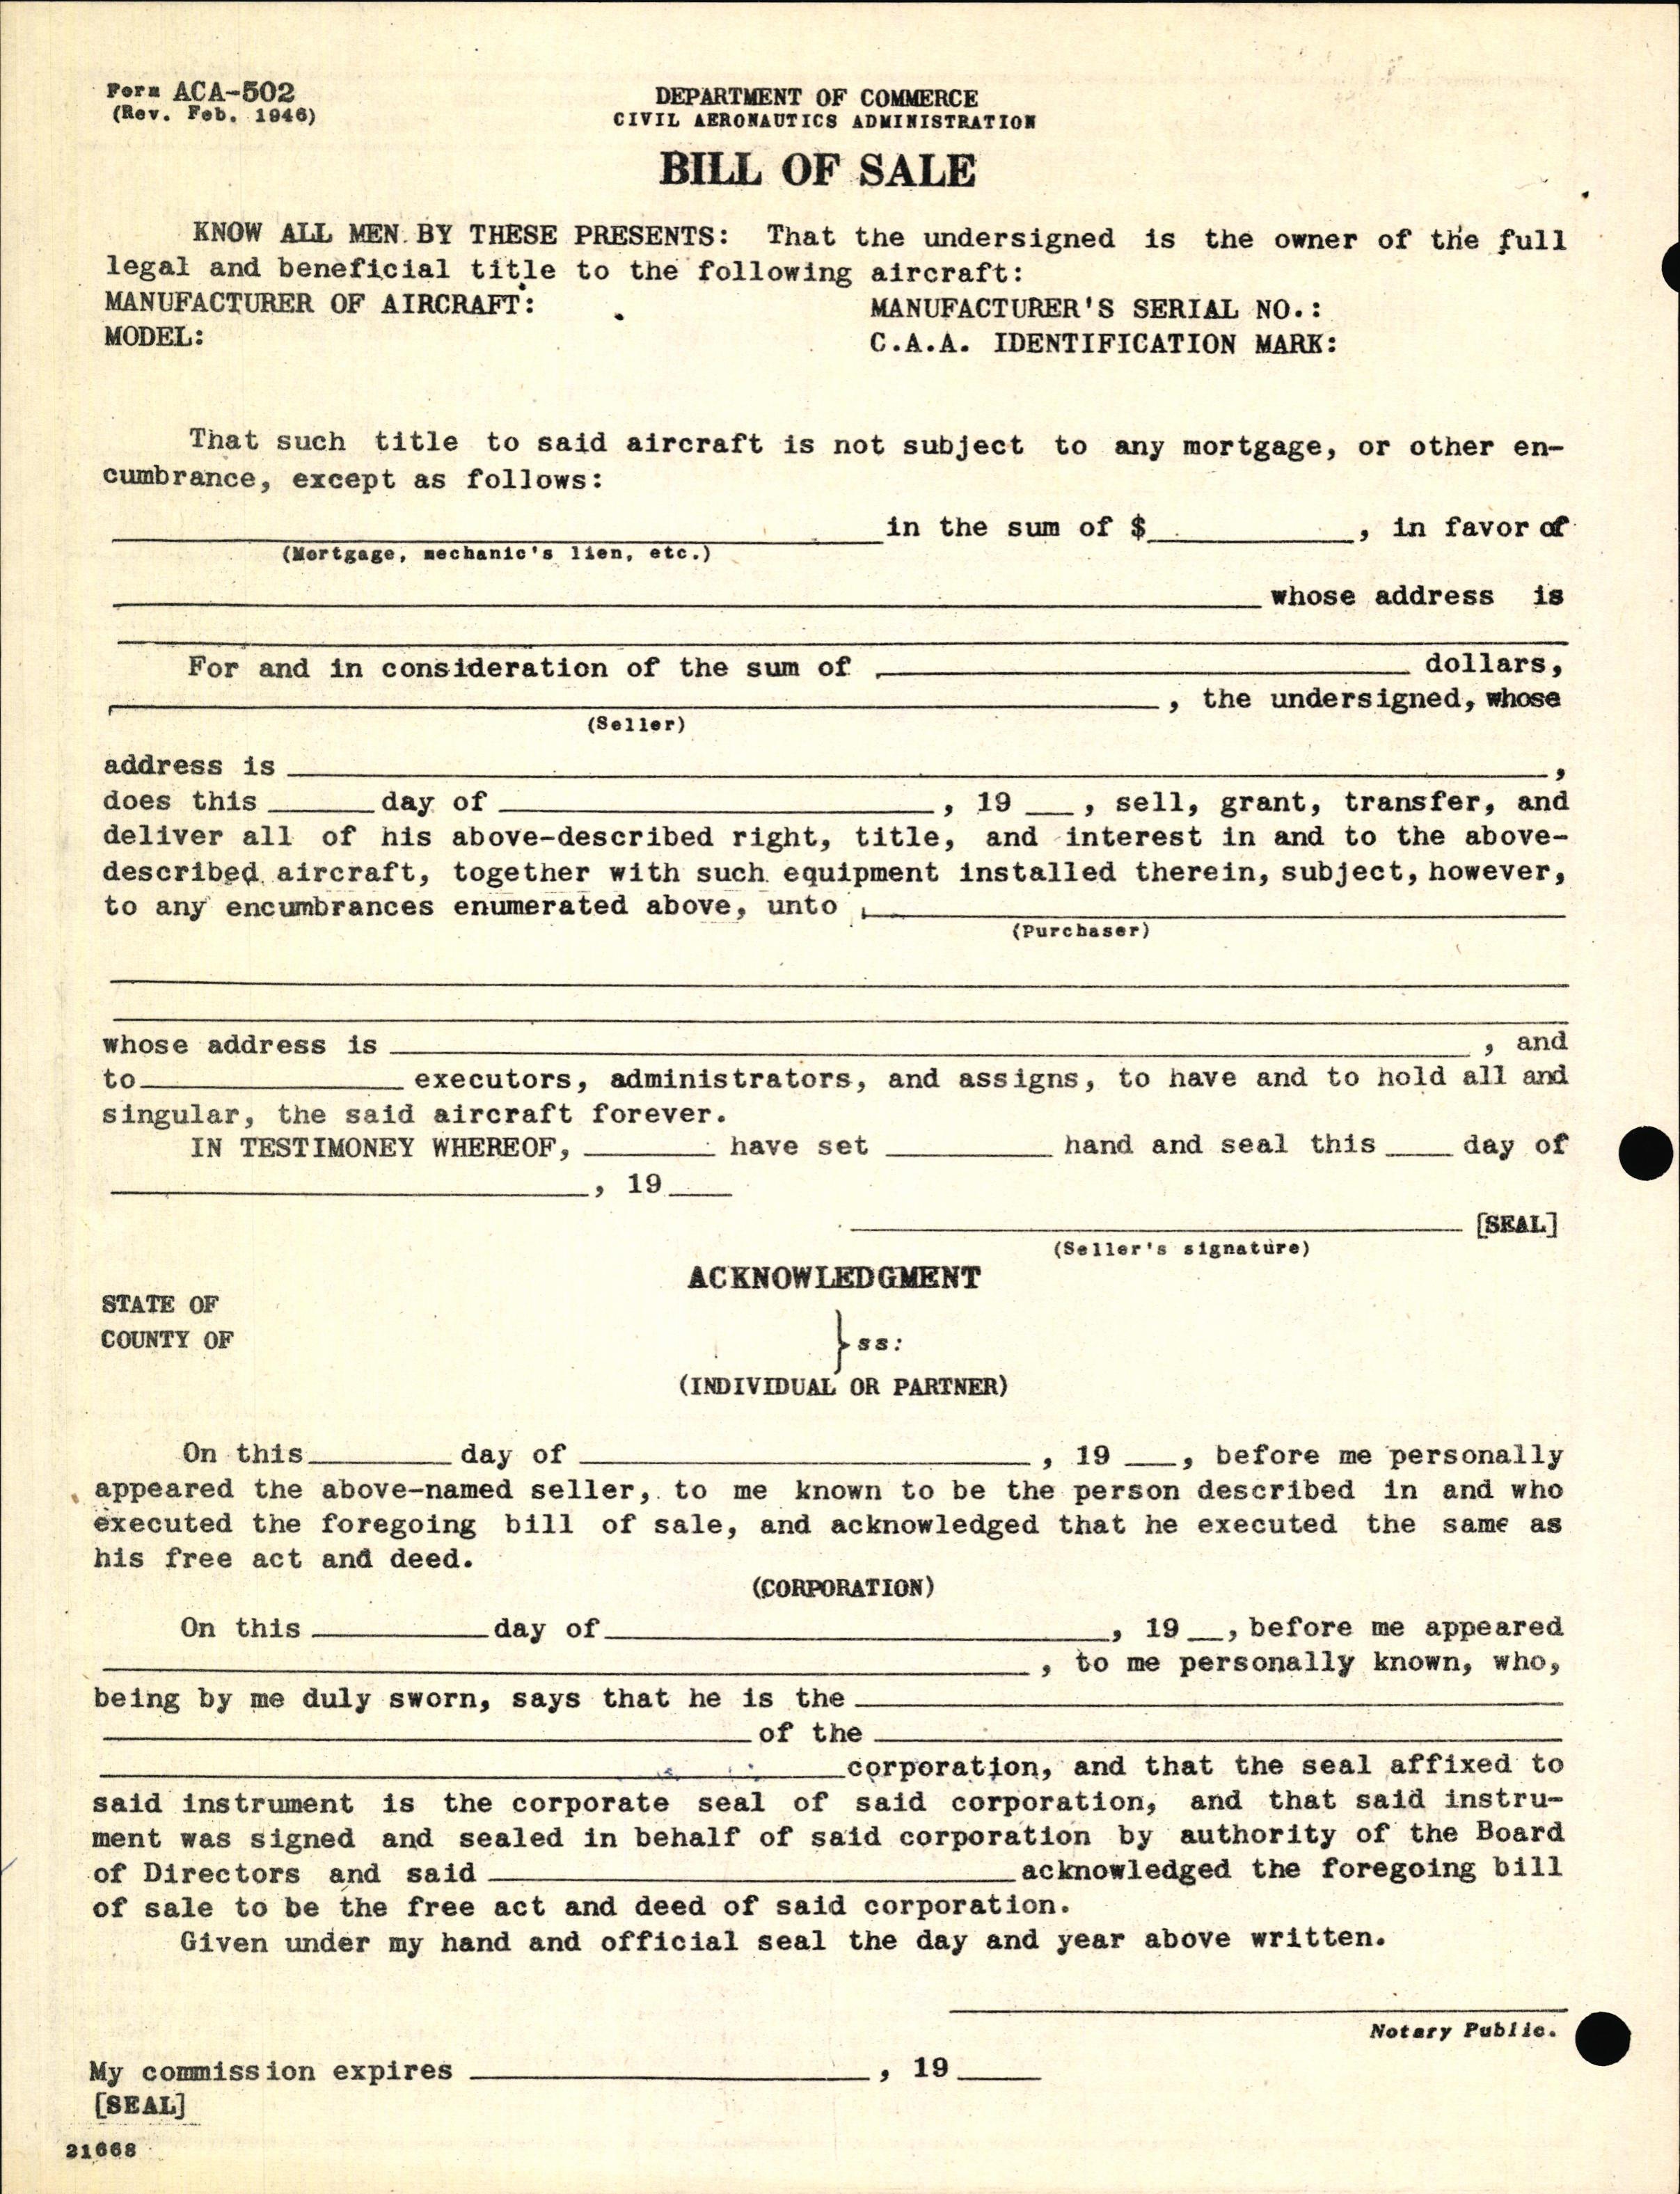 Sample page 4 from AirCorps Library document: Technical Information for Serial Number 2057